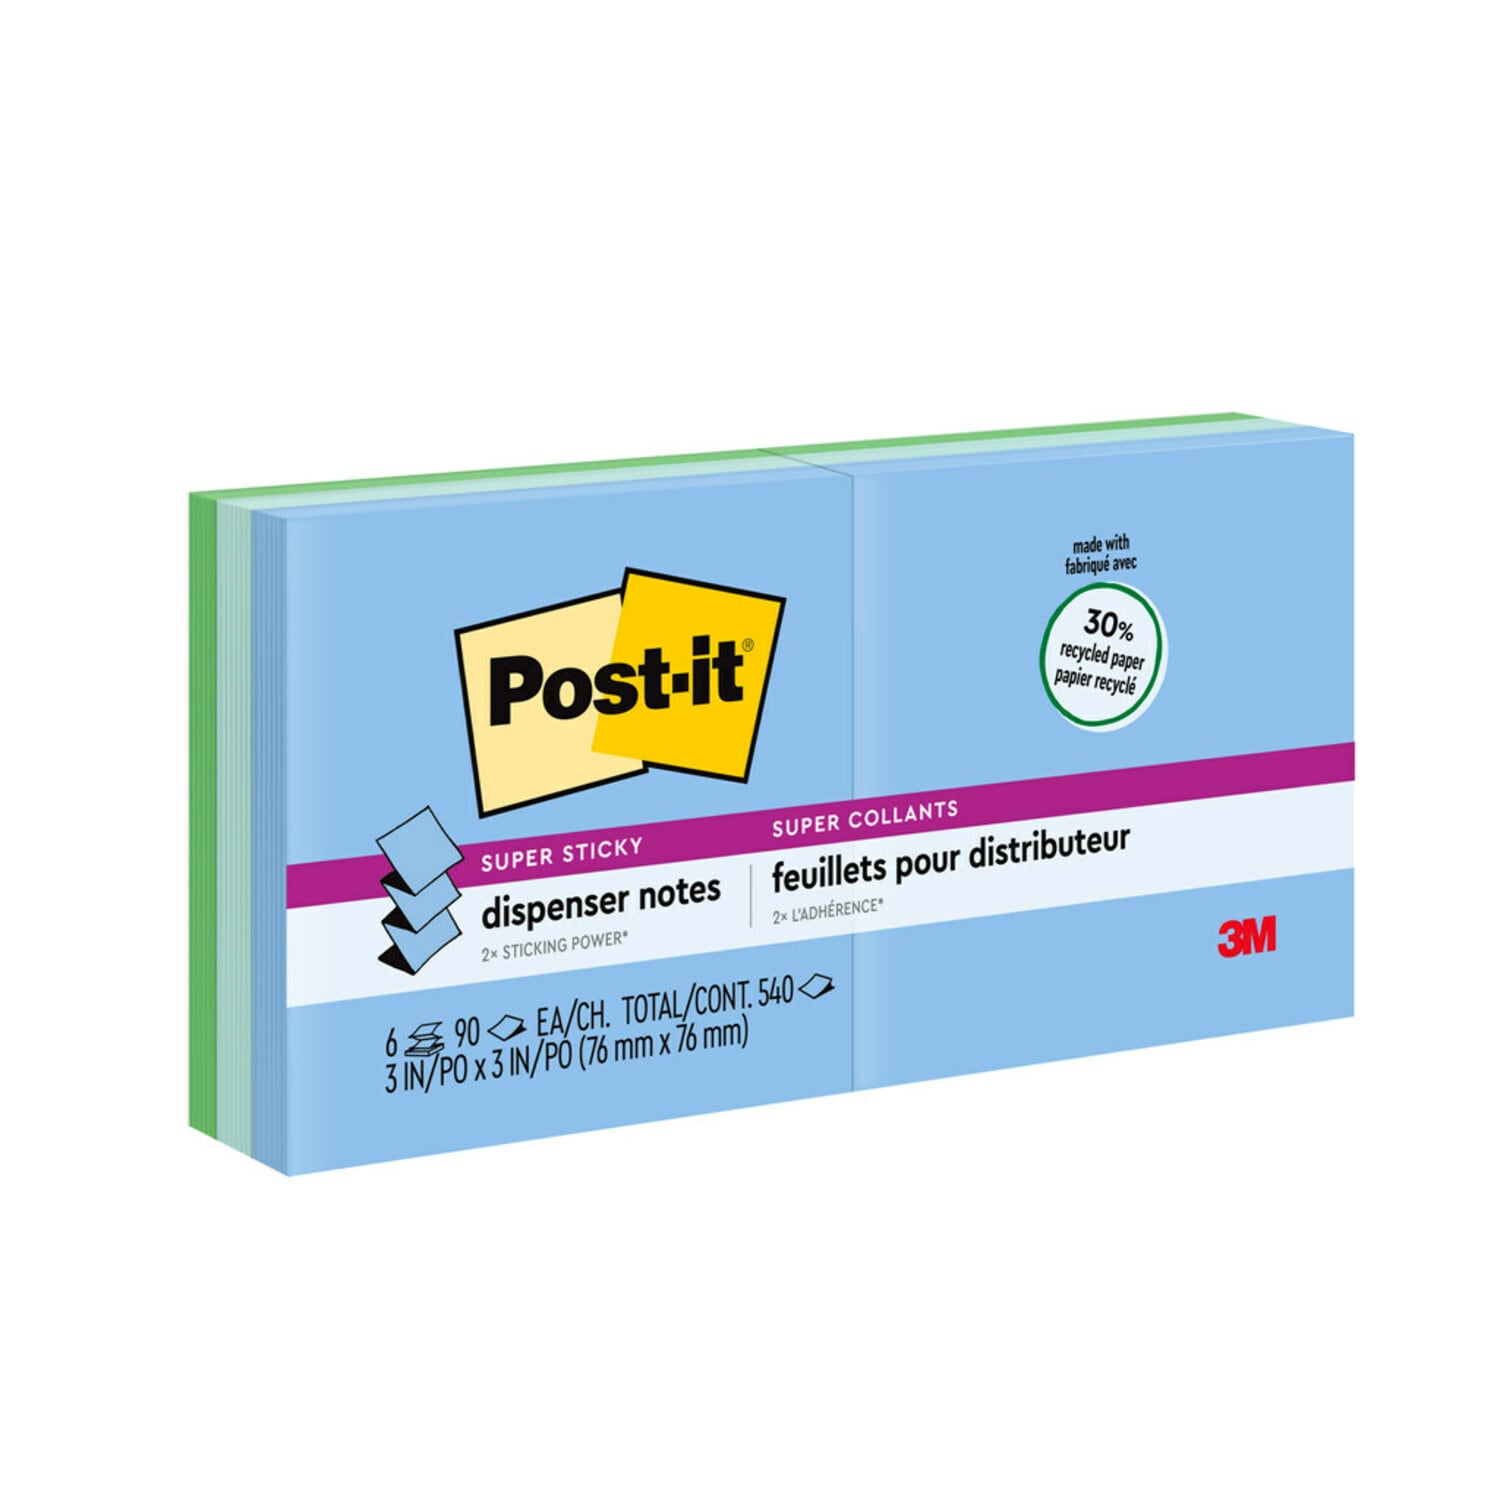 7100230179 - Post-it Super Sticky Recycled Dispenser Pop-up Notes R330-6SST, 3 in x 3 in (76 mm x 76 mm)